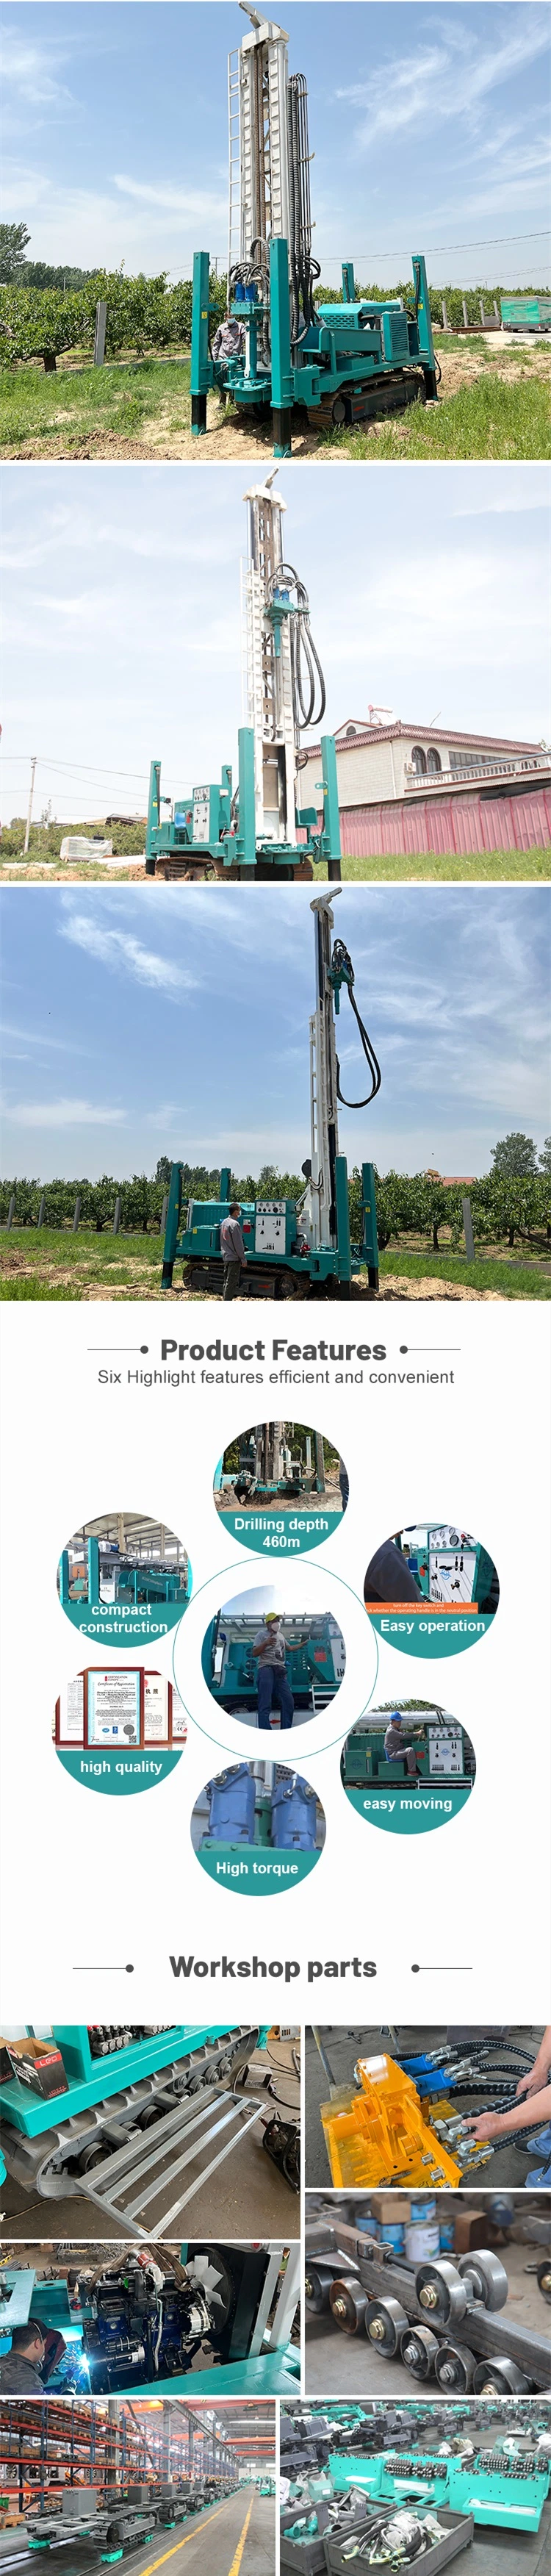 200m/300m/400m/600m Mobile Crawler Equipment Hydraulic Portable Borehole Water Drilling Machine Deep Water Well Drilling Rig